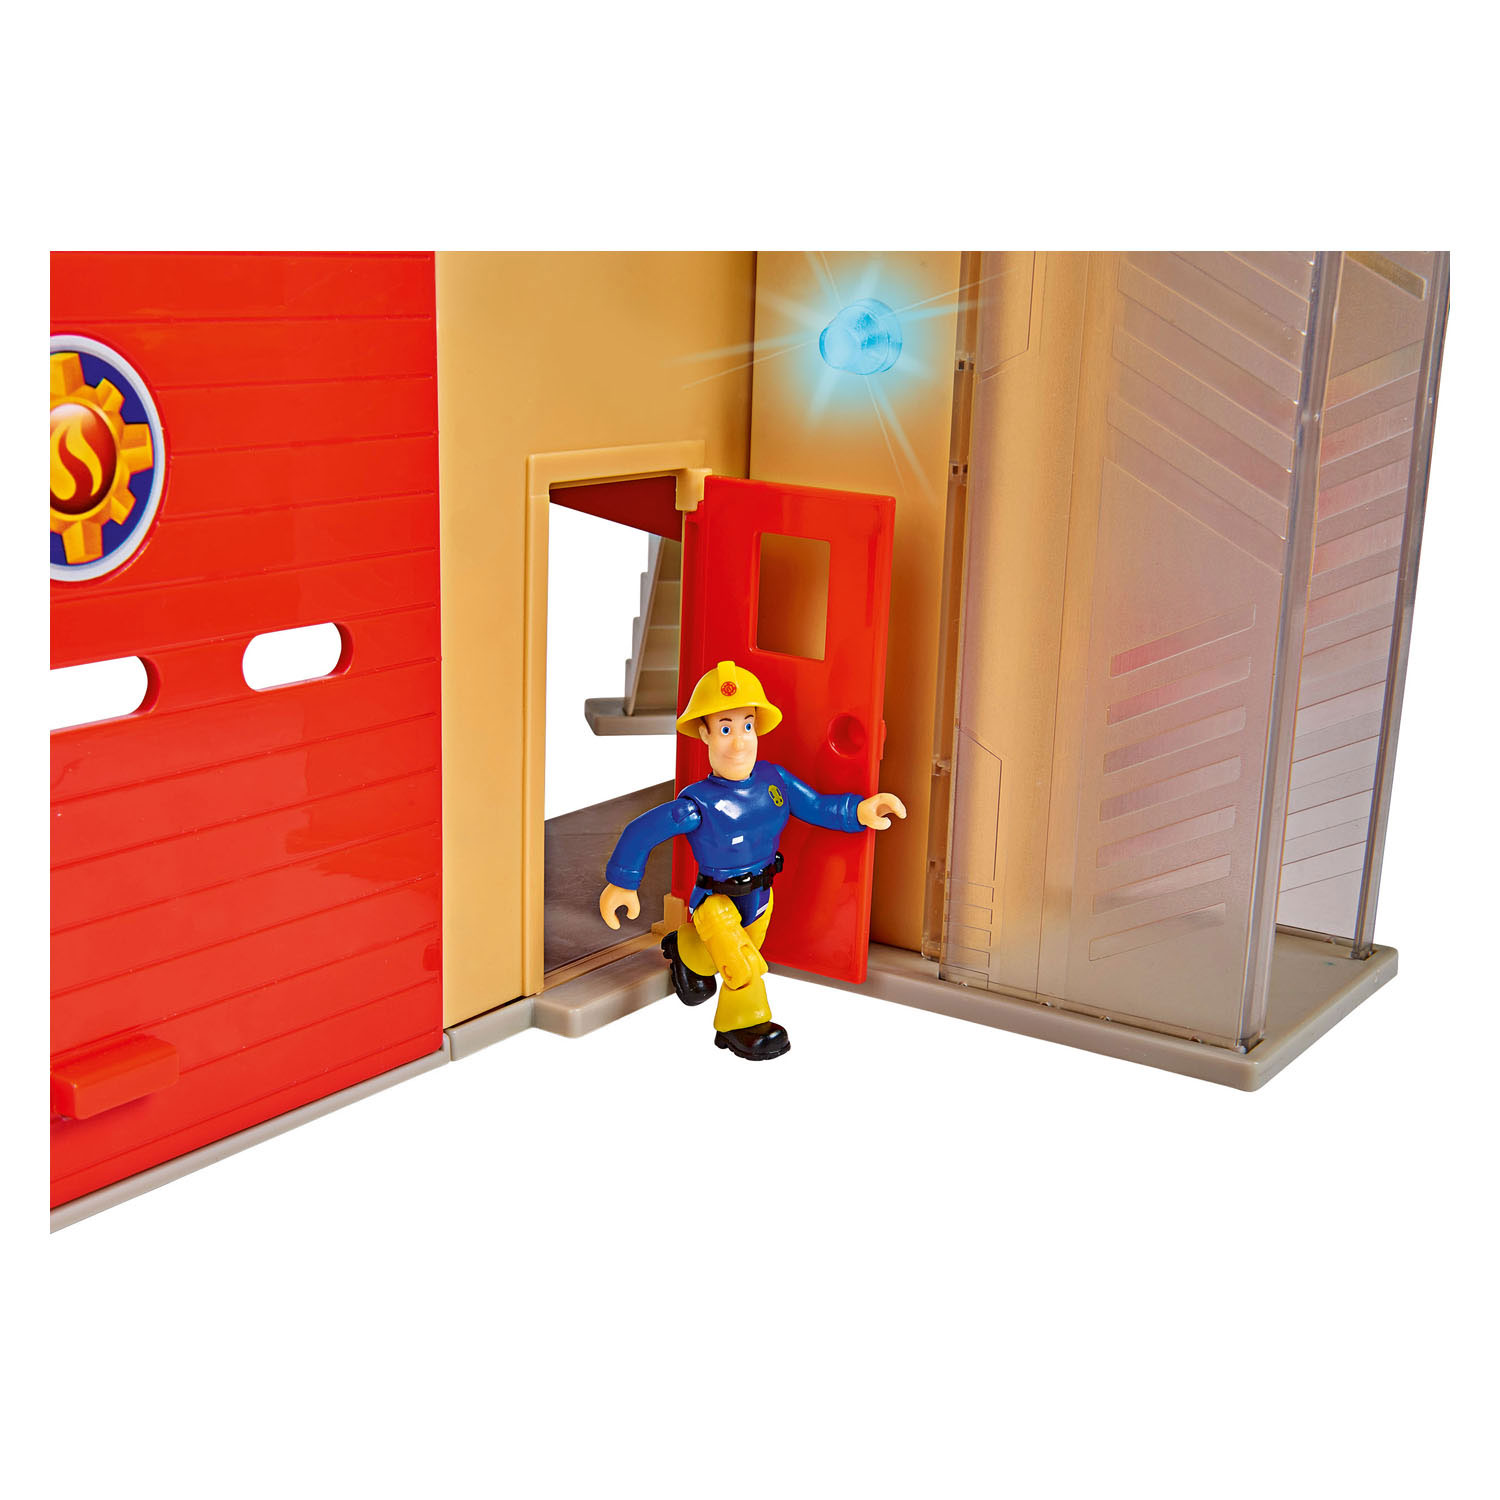 Sustainable Wood Toy Hape Large Fire Station Playset With Battery-Powered  Alarms, Fire Fighter, Rescue Dog And Helicopter. 3 years +